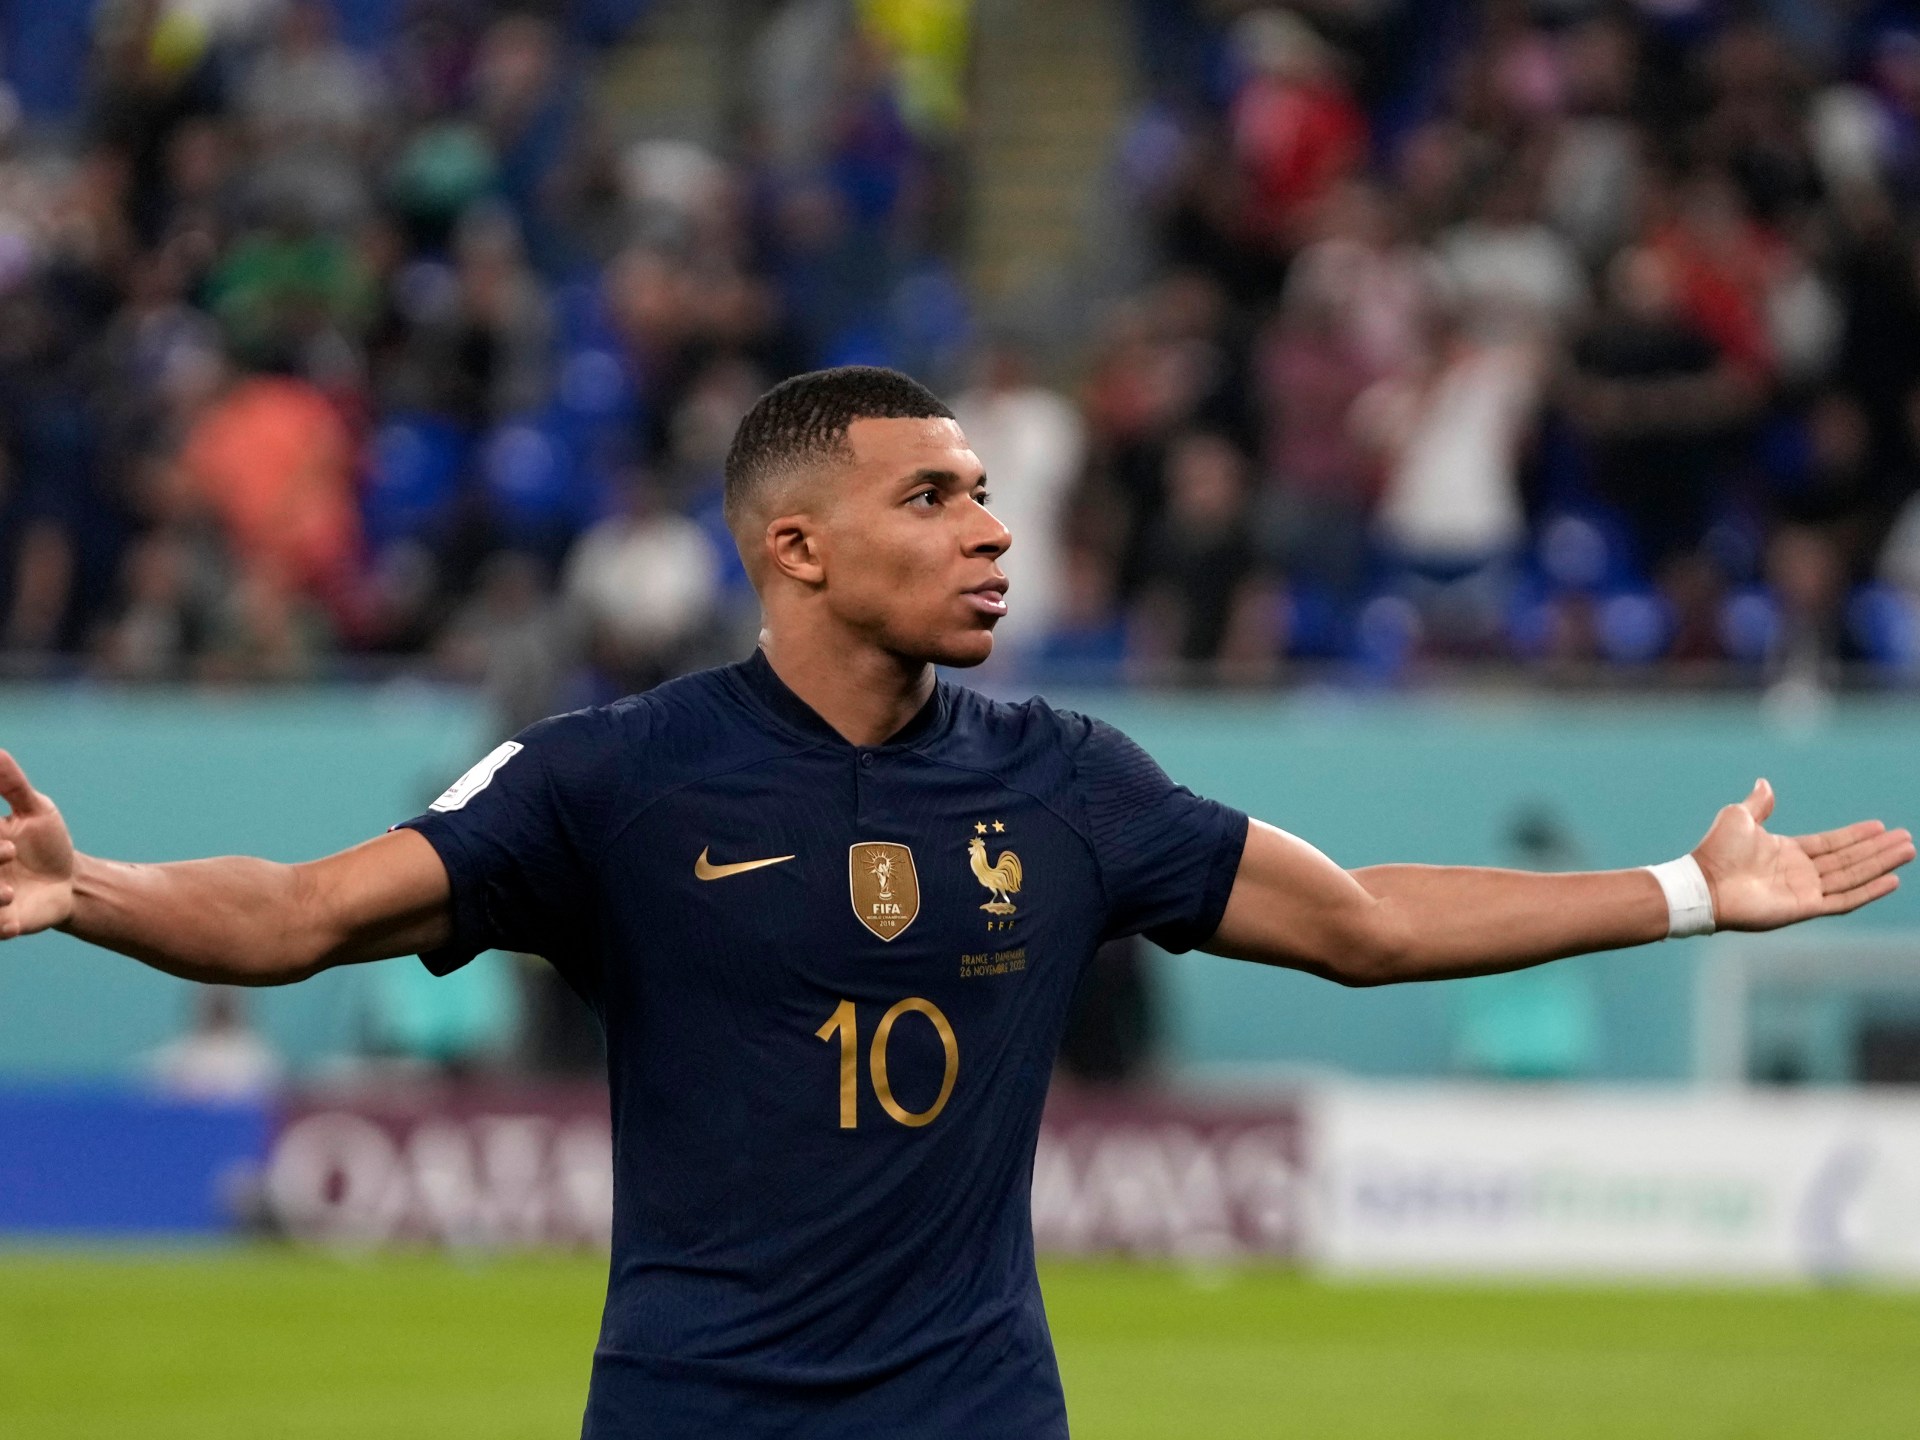 Photographs: Mbappe scores twice as France overcome Denmark